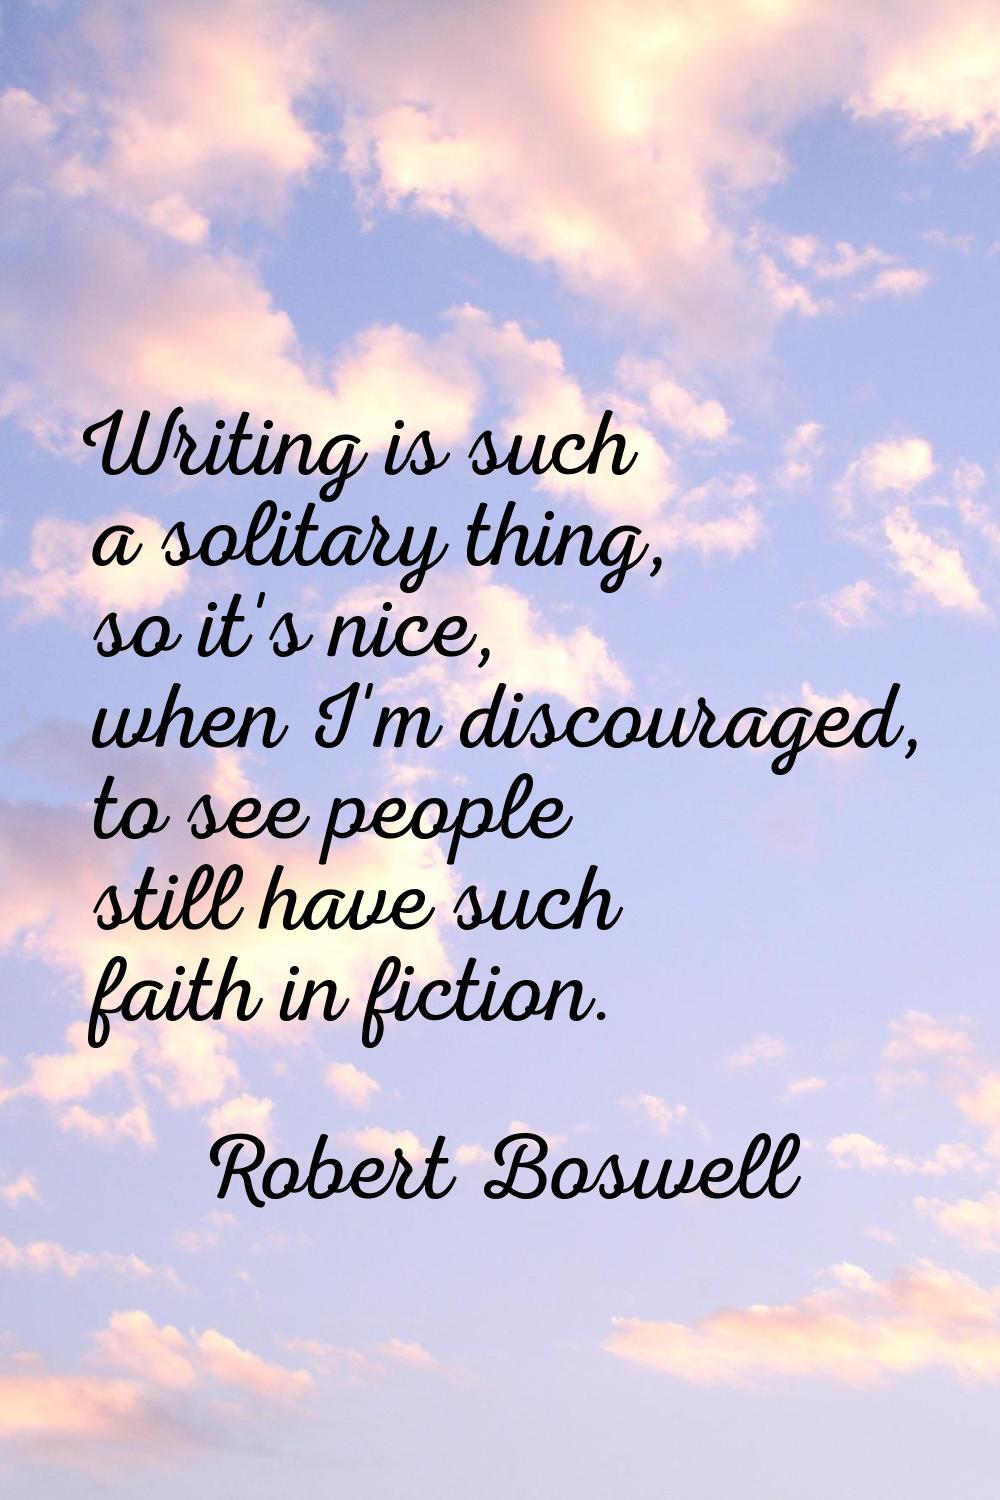 Writing is such a solitary thing, so it's nice, when I'm discouraged, to see people still have such